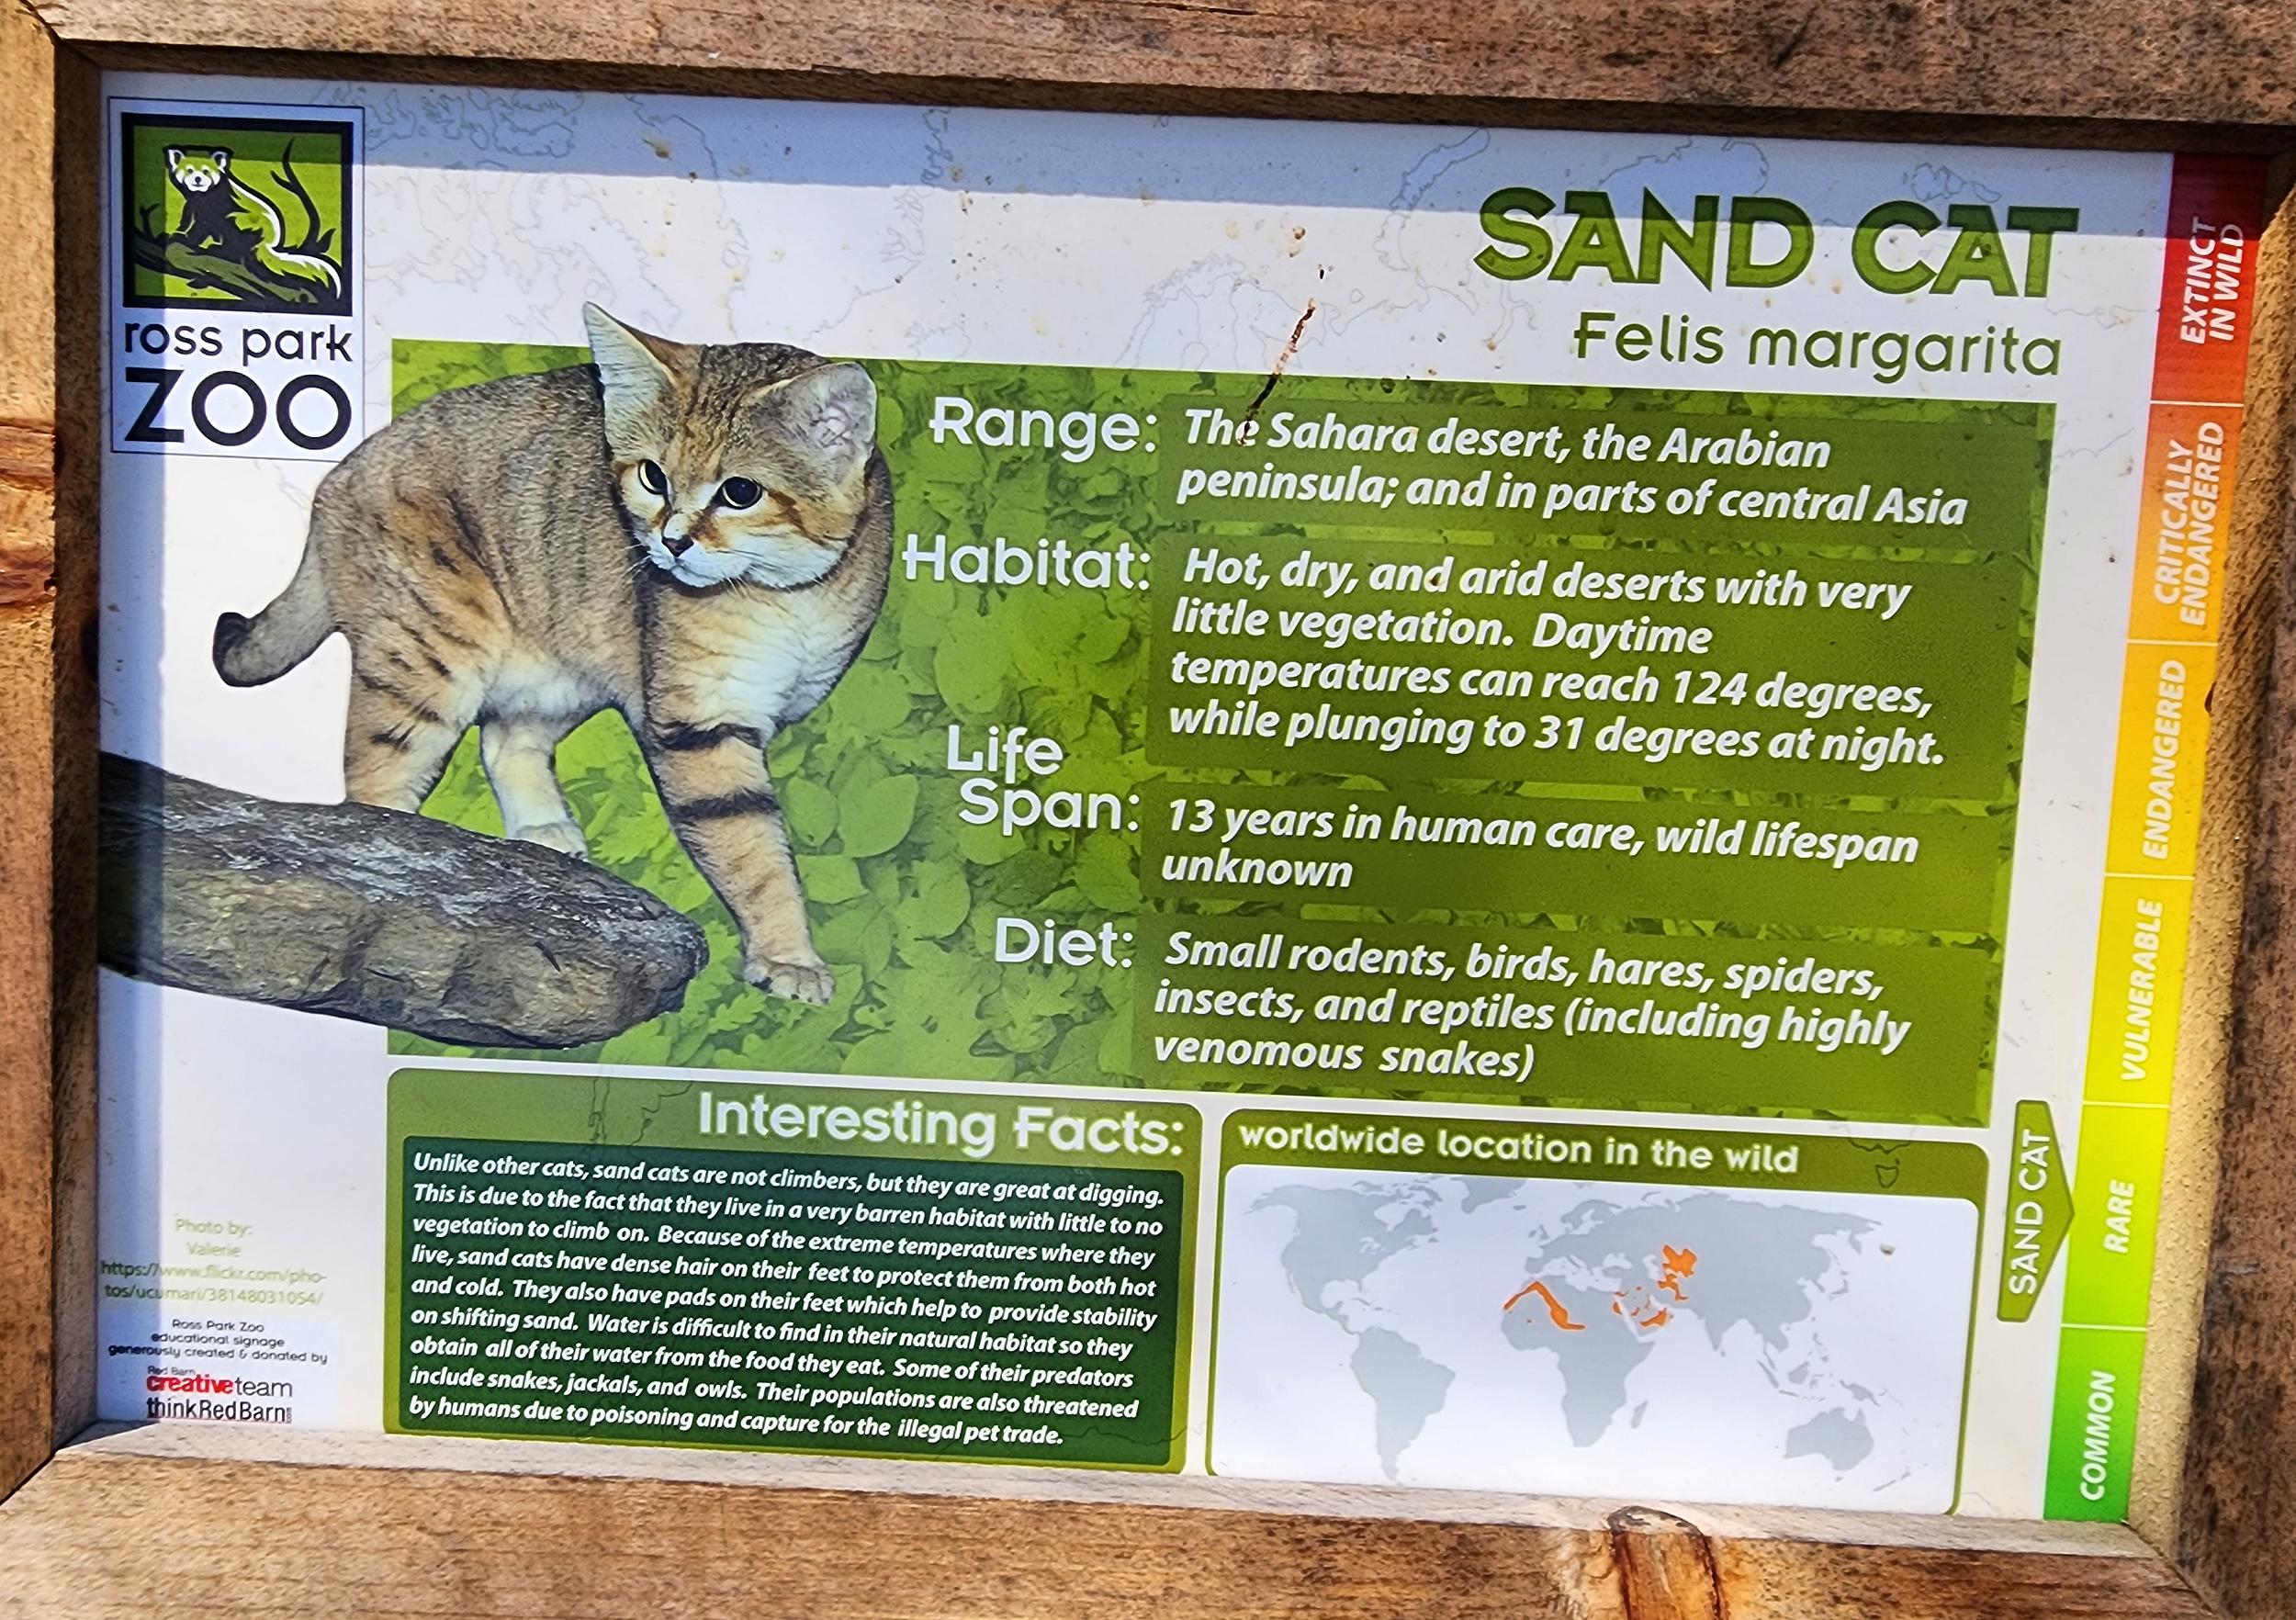 FIRST VIDEO: Ross Park Zoo's New Sand Cat Kittens Acting Cute